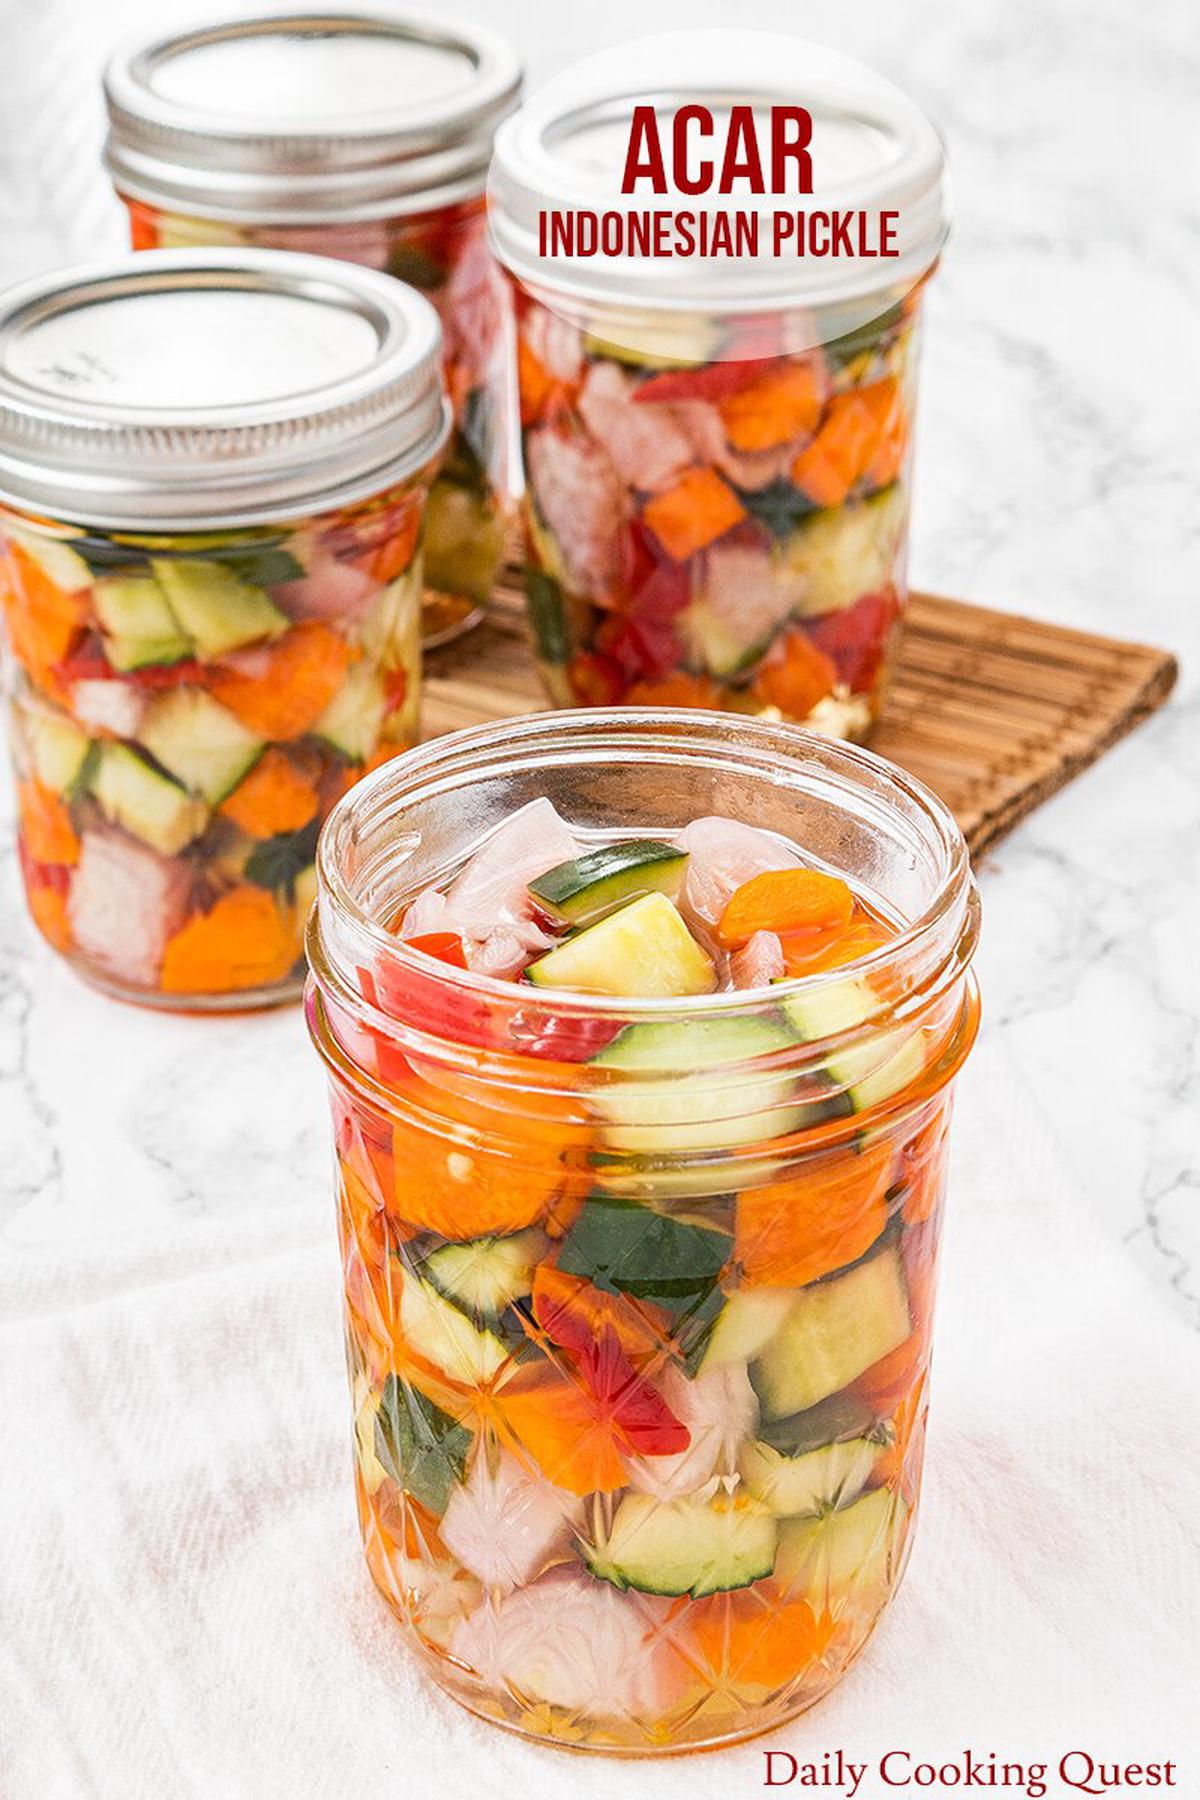 Acar - Indonesian pickle with cucumber, carrot, shallot, and red chilies.